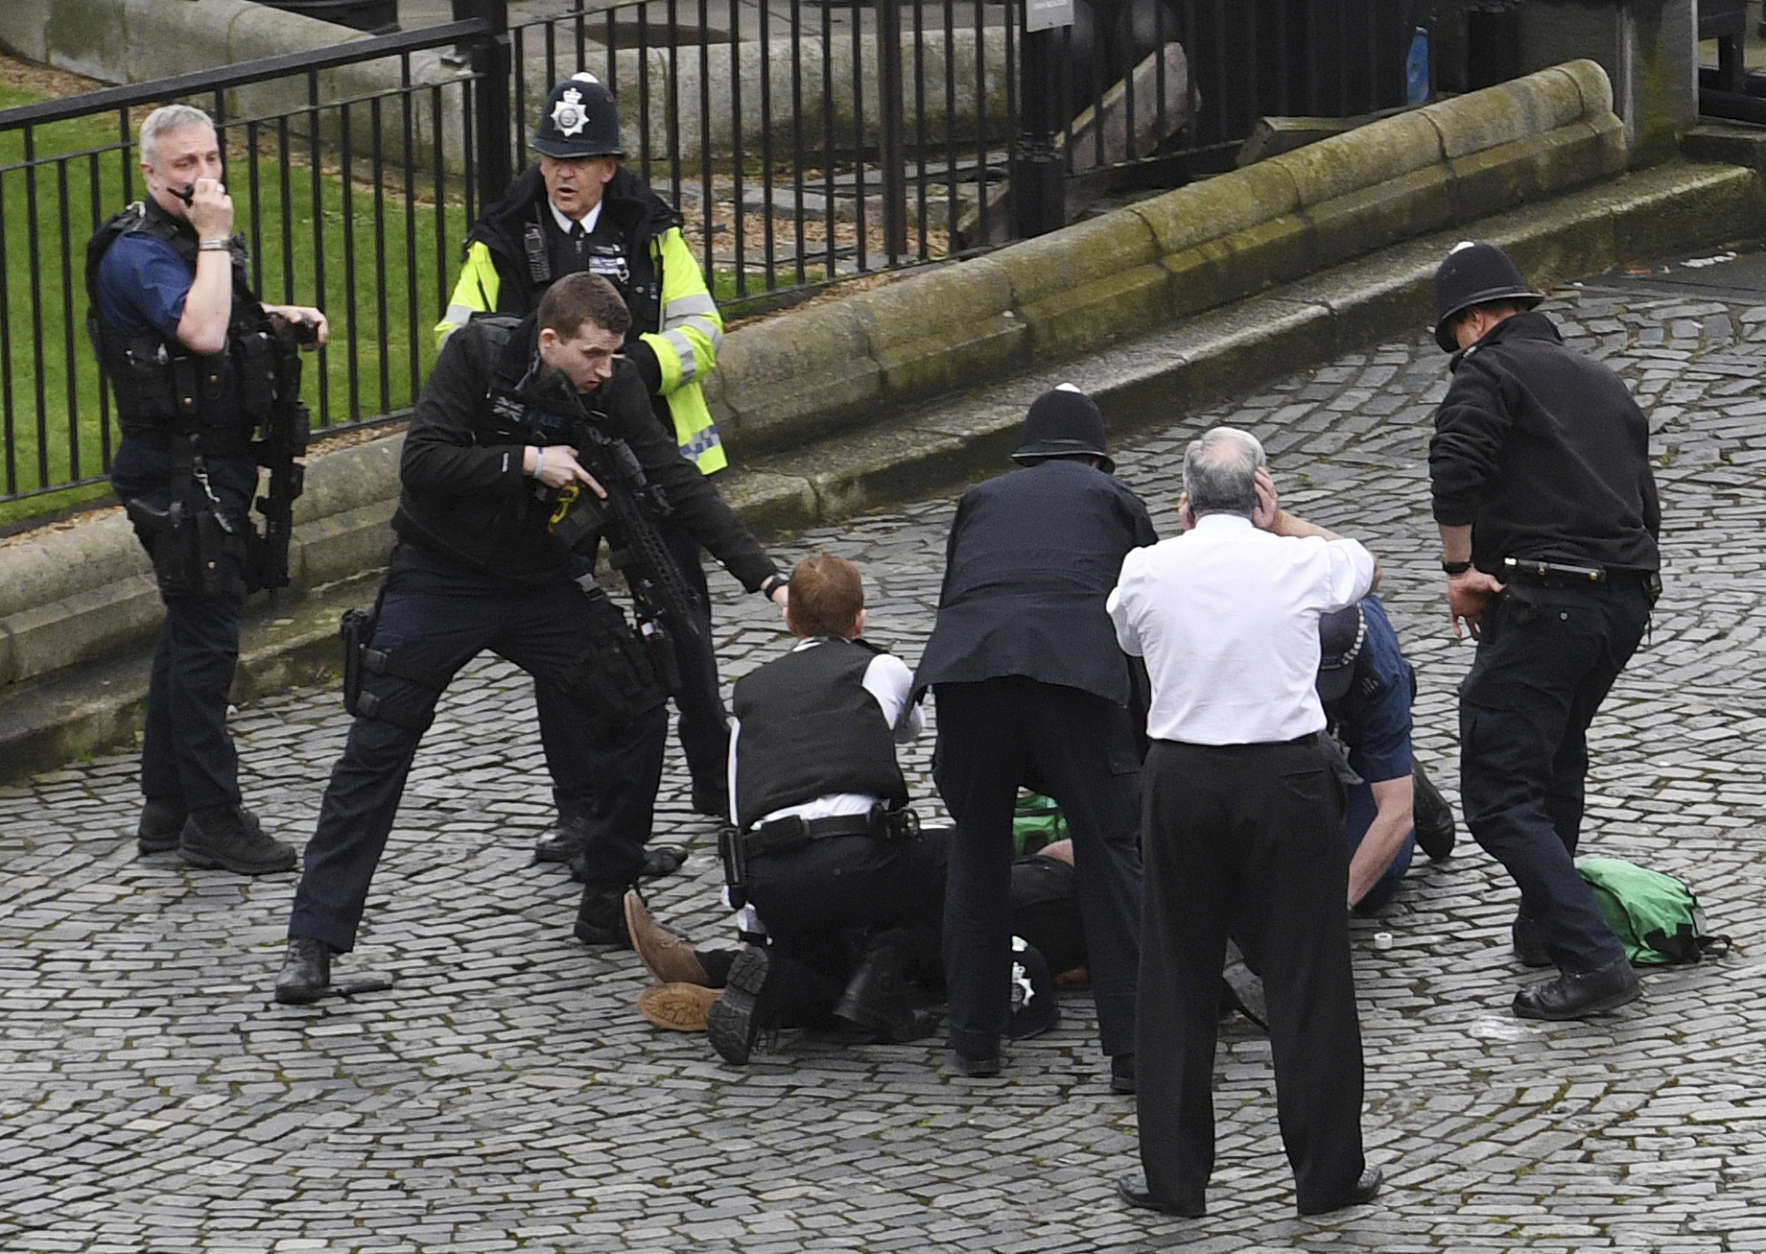 A policeman points a gun at a man on the floor as emergency services attend the scene outside the Palace of Westminster, London, Wednesday, March 22, 2017.  London police say they are treating a gun and knife incident at Britain's Parliament "as a terrorist incident until we know otherwise." The Metropolitan Police says in a statement that the incident is ongoing. It is urging people to stay away from the area. Officials say a man with a knife attacked a police officer at Parliament and was shot by officers. Nearby, witnesses say a vehicle struck several people on the Westminster Bridge.  (Stefan Rousseau/PA via AP).